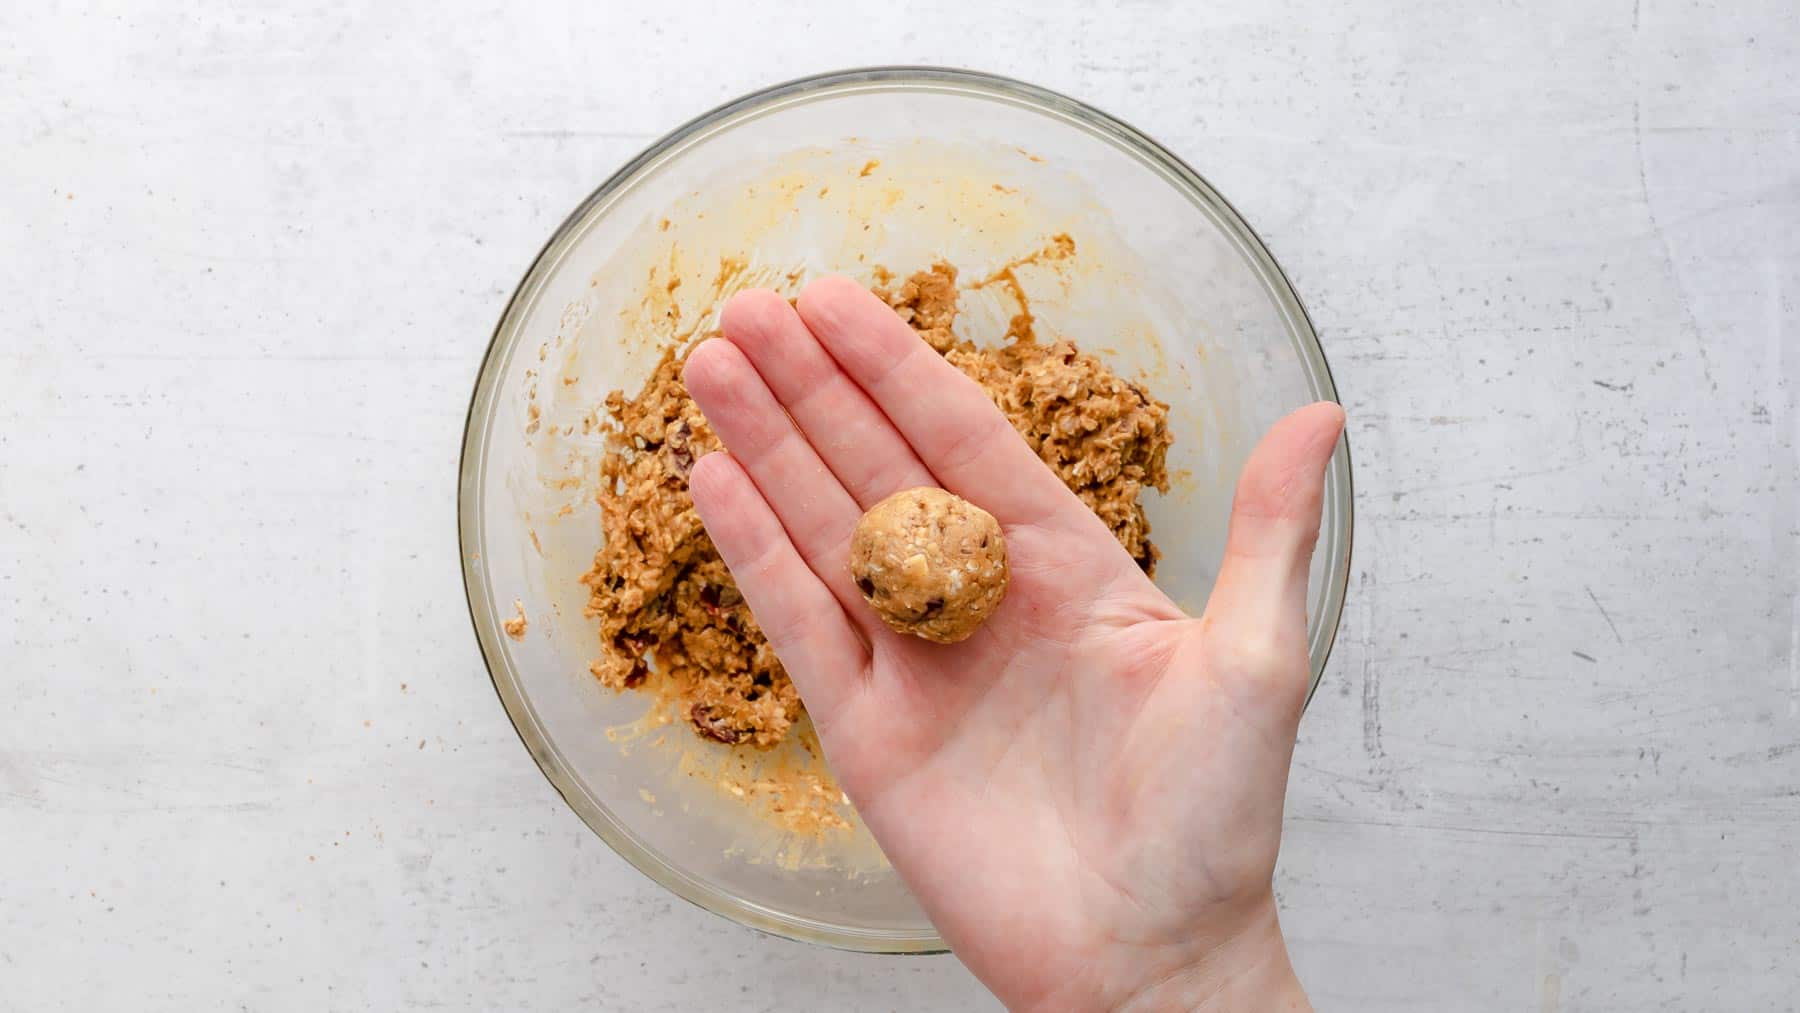 holding a ball of peanut butter bites in the palm of a hand